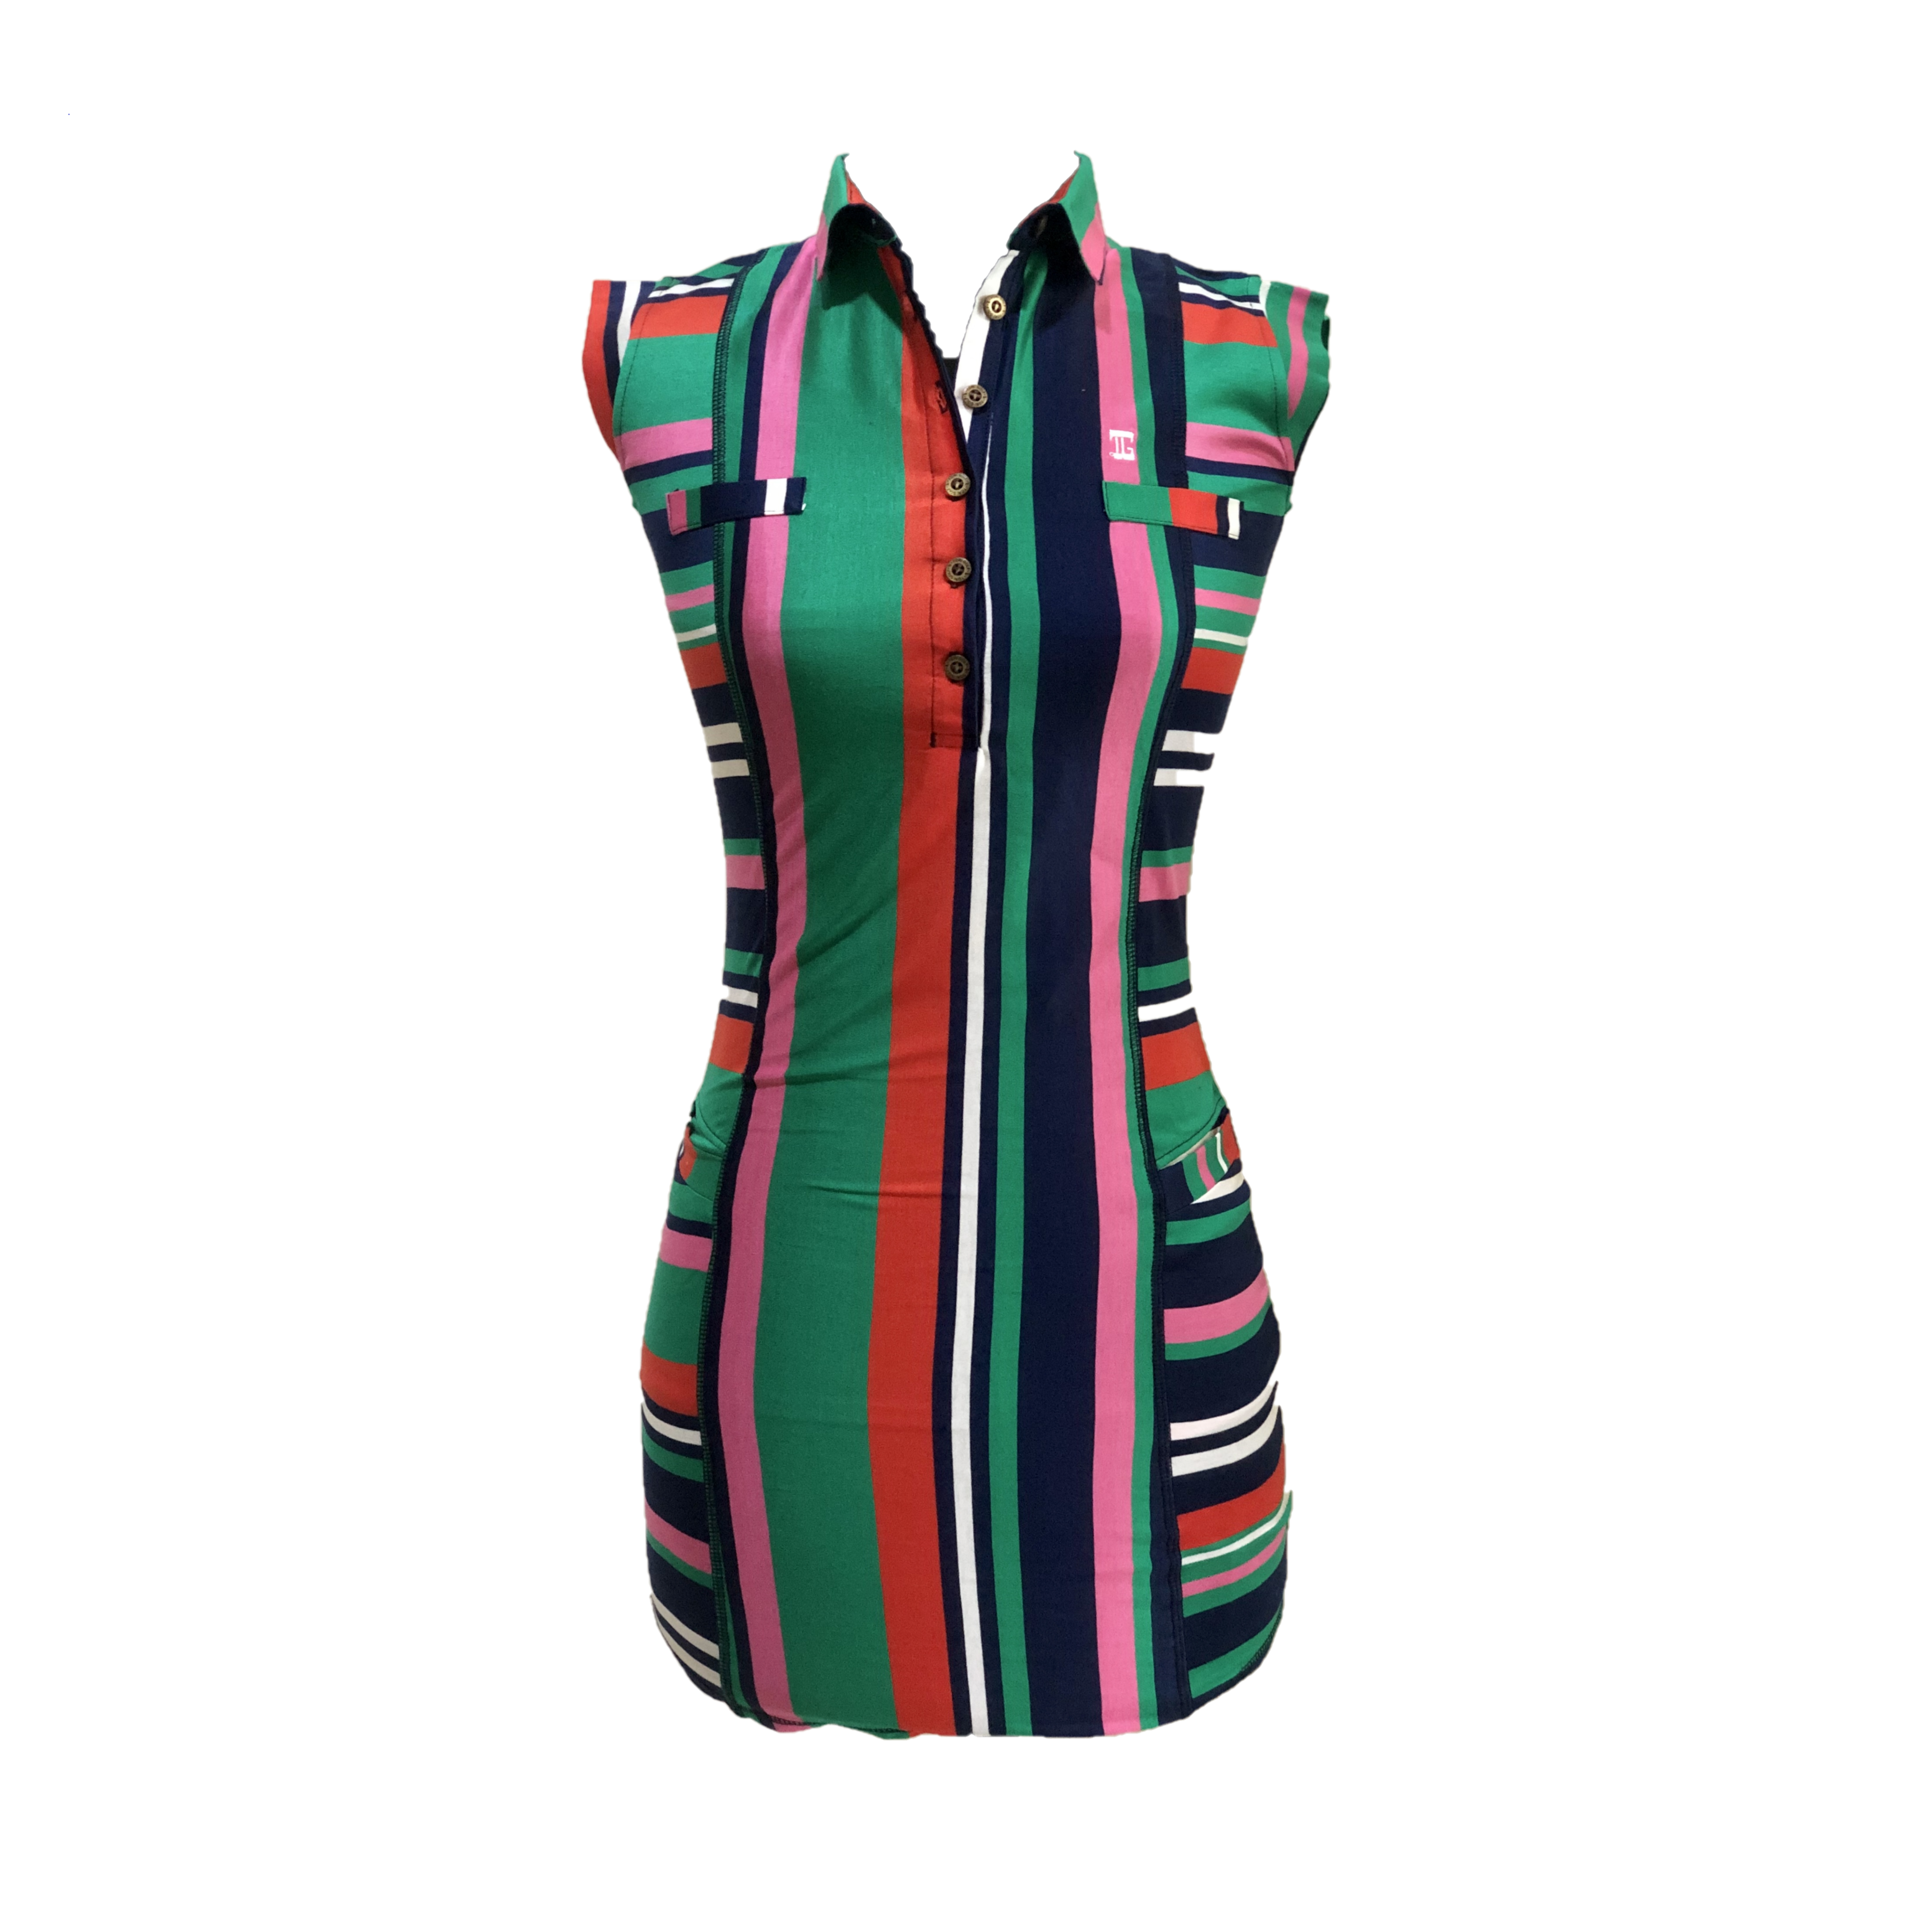 GD-014C || Golf Dress Ultra Short Sleeve Multi Colored Vertical Front and Back Broad Stripes and Horizontal Side  (Navy, Pink Green, Red and White)